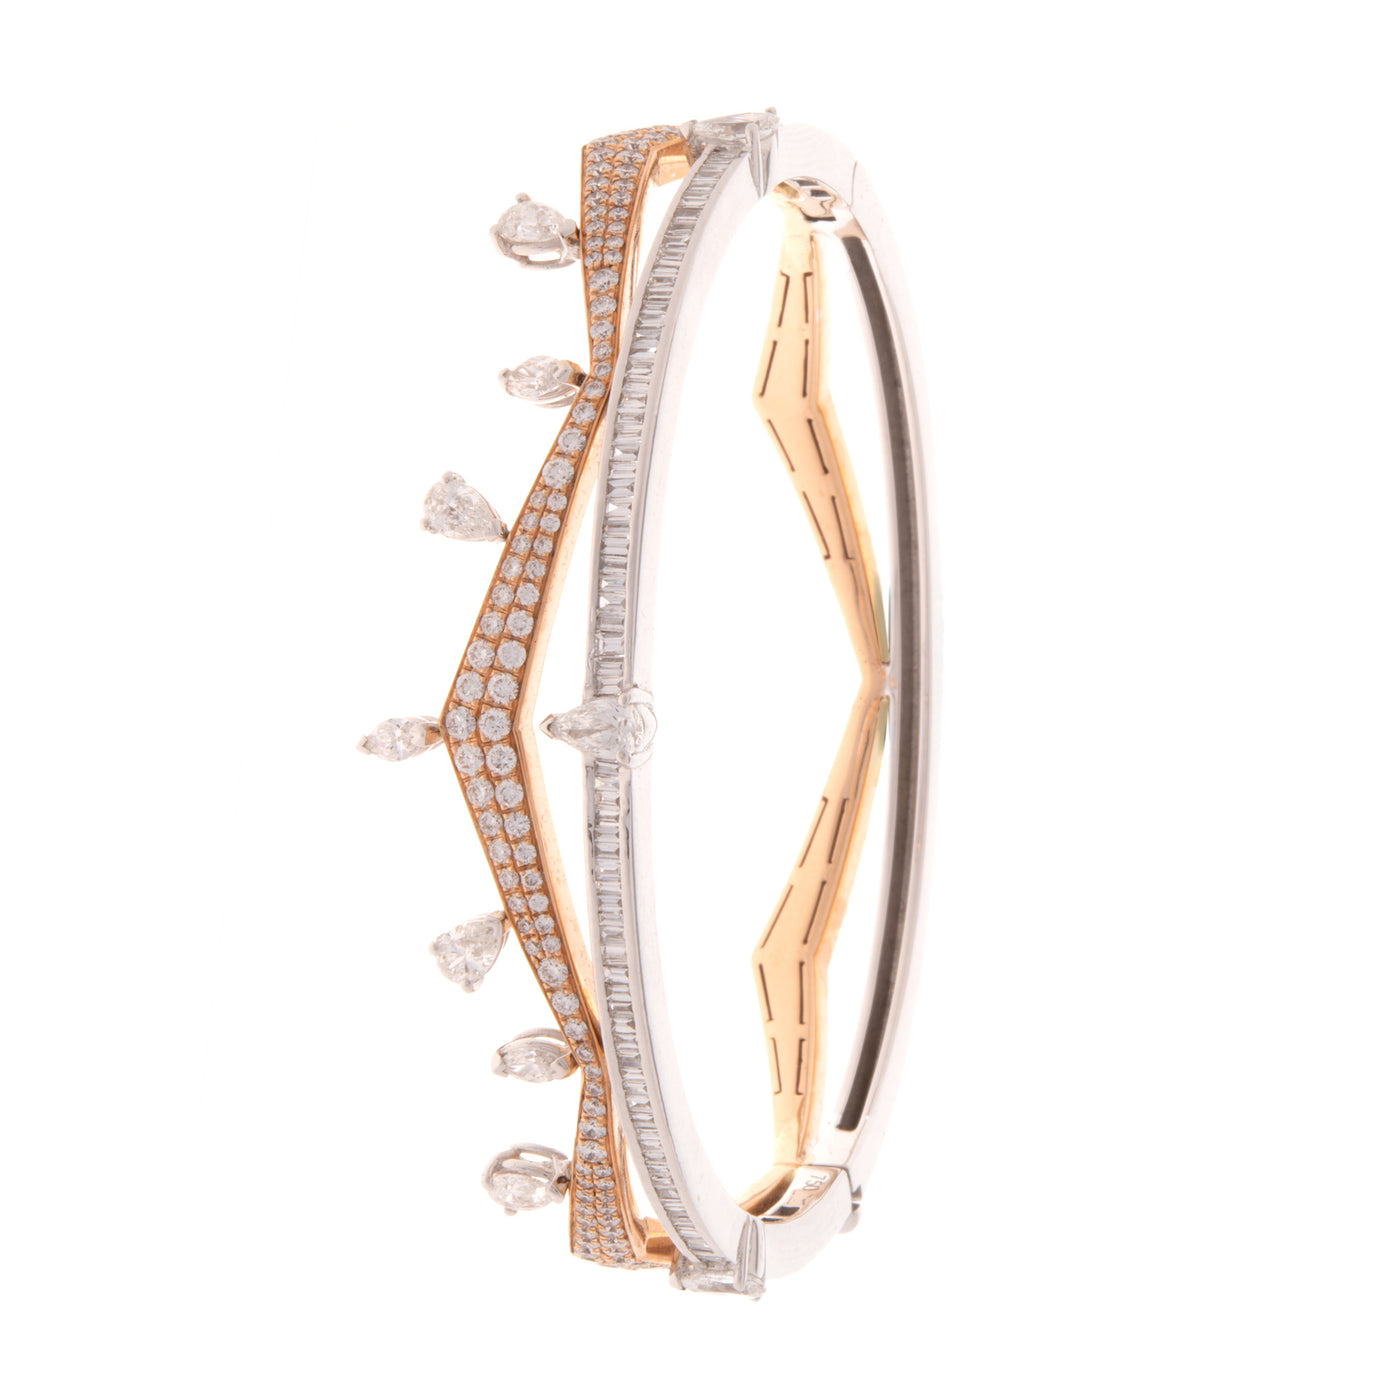 Soit Belle White and Rose Gold Pointed Diamond Bangle